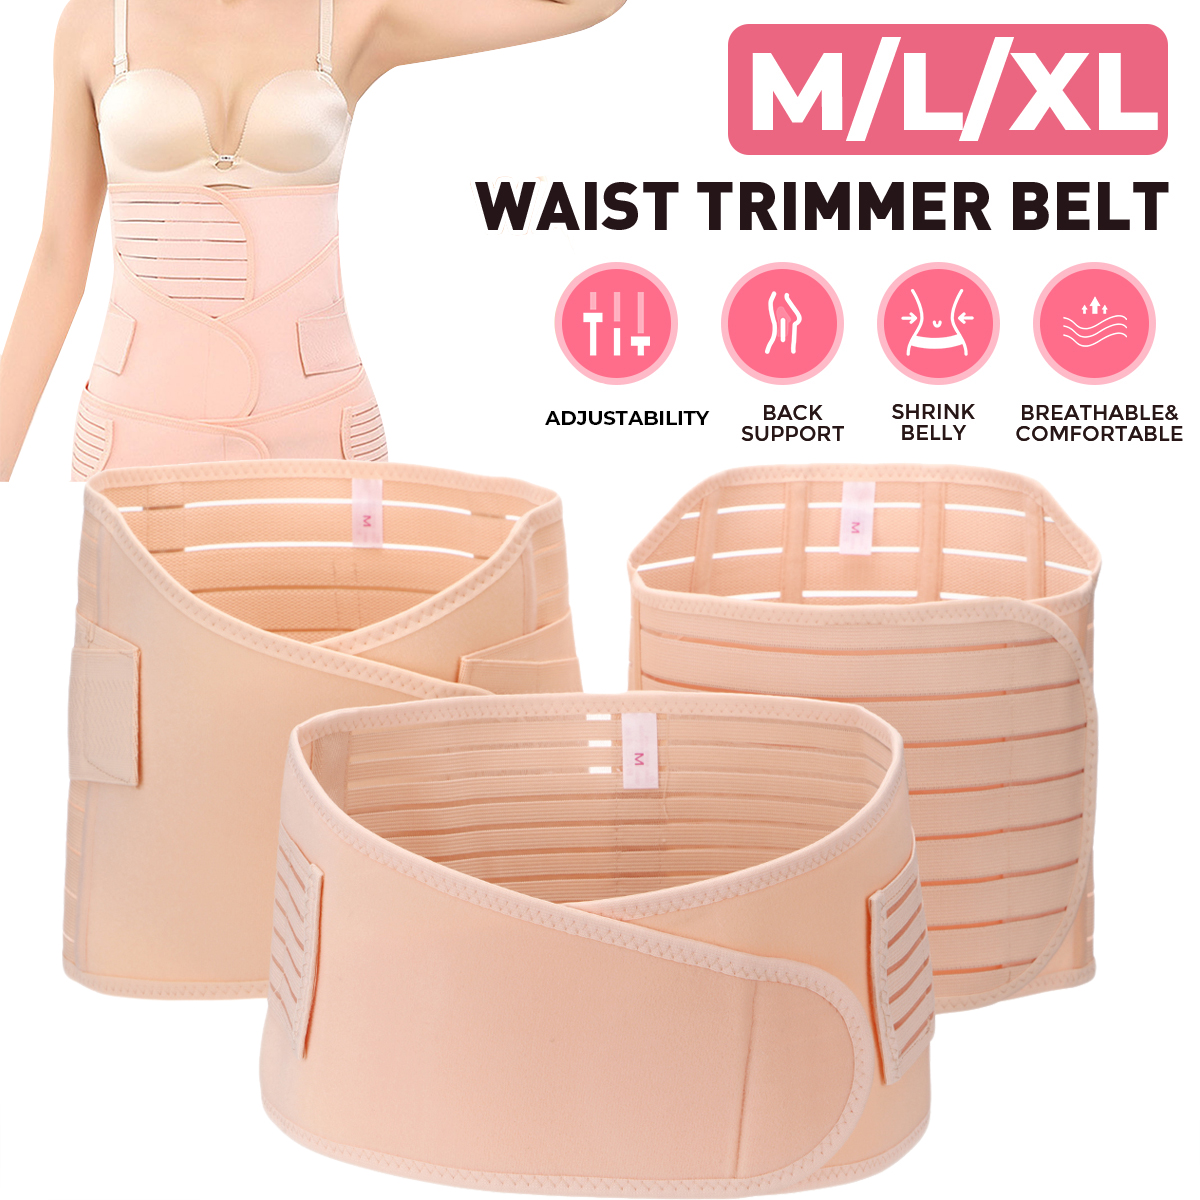 Womens-Belly-Band-Belt-Body-Shaper-Cincher-Slimming-Tummy-Postpartum-Recovery-1940283-1